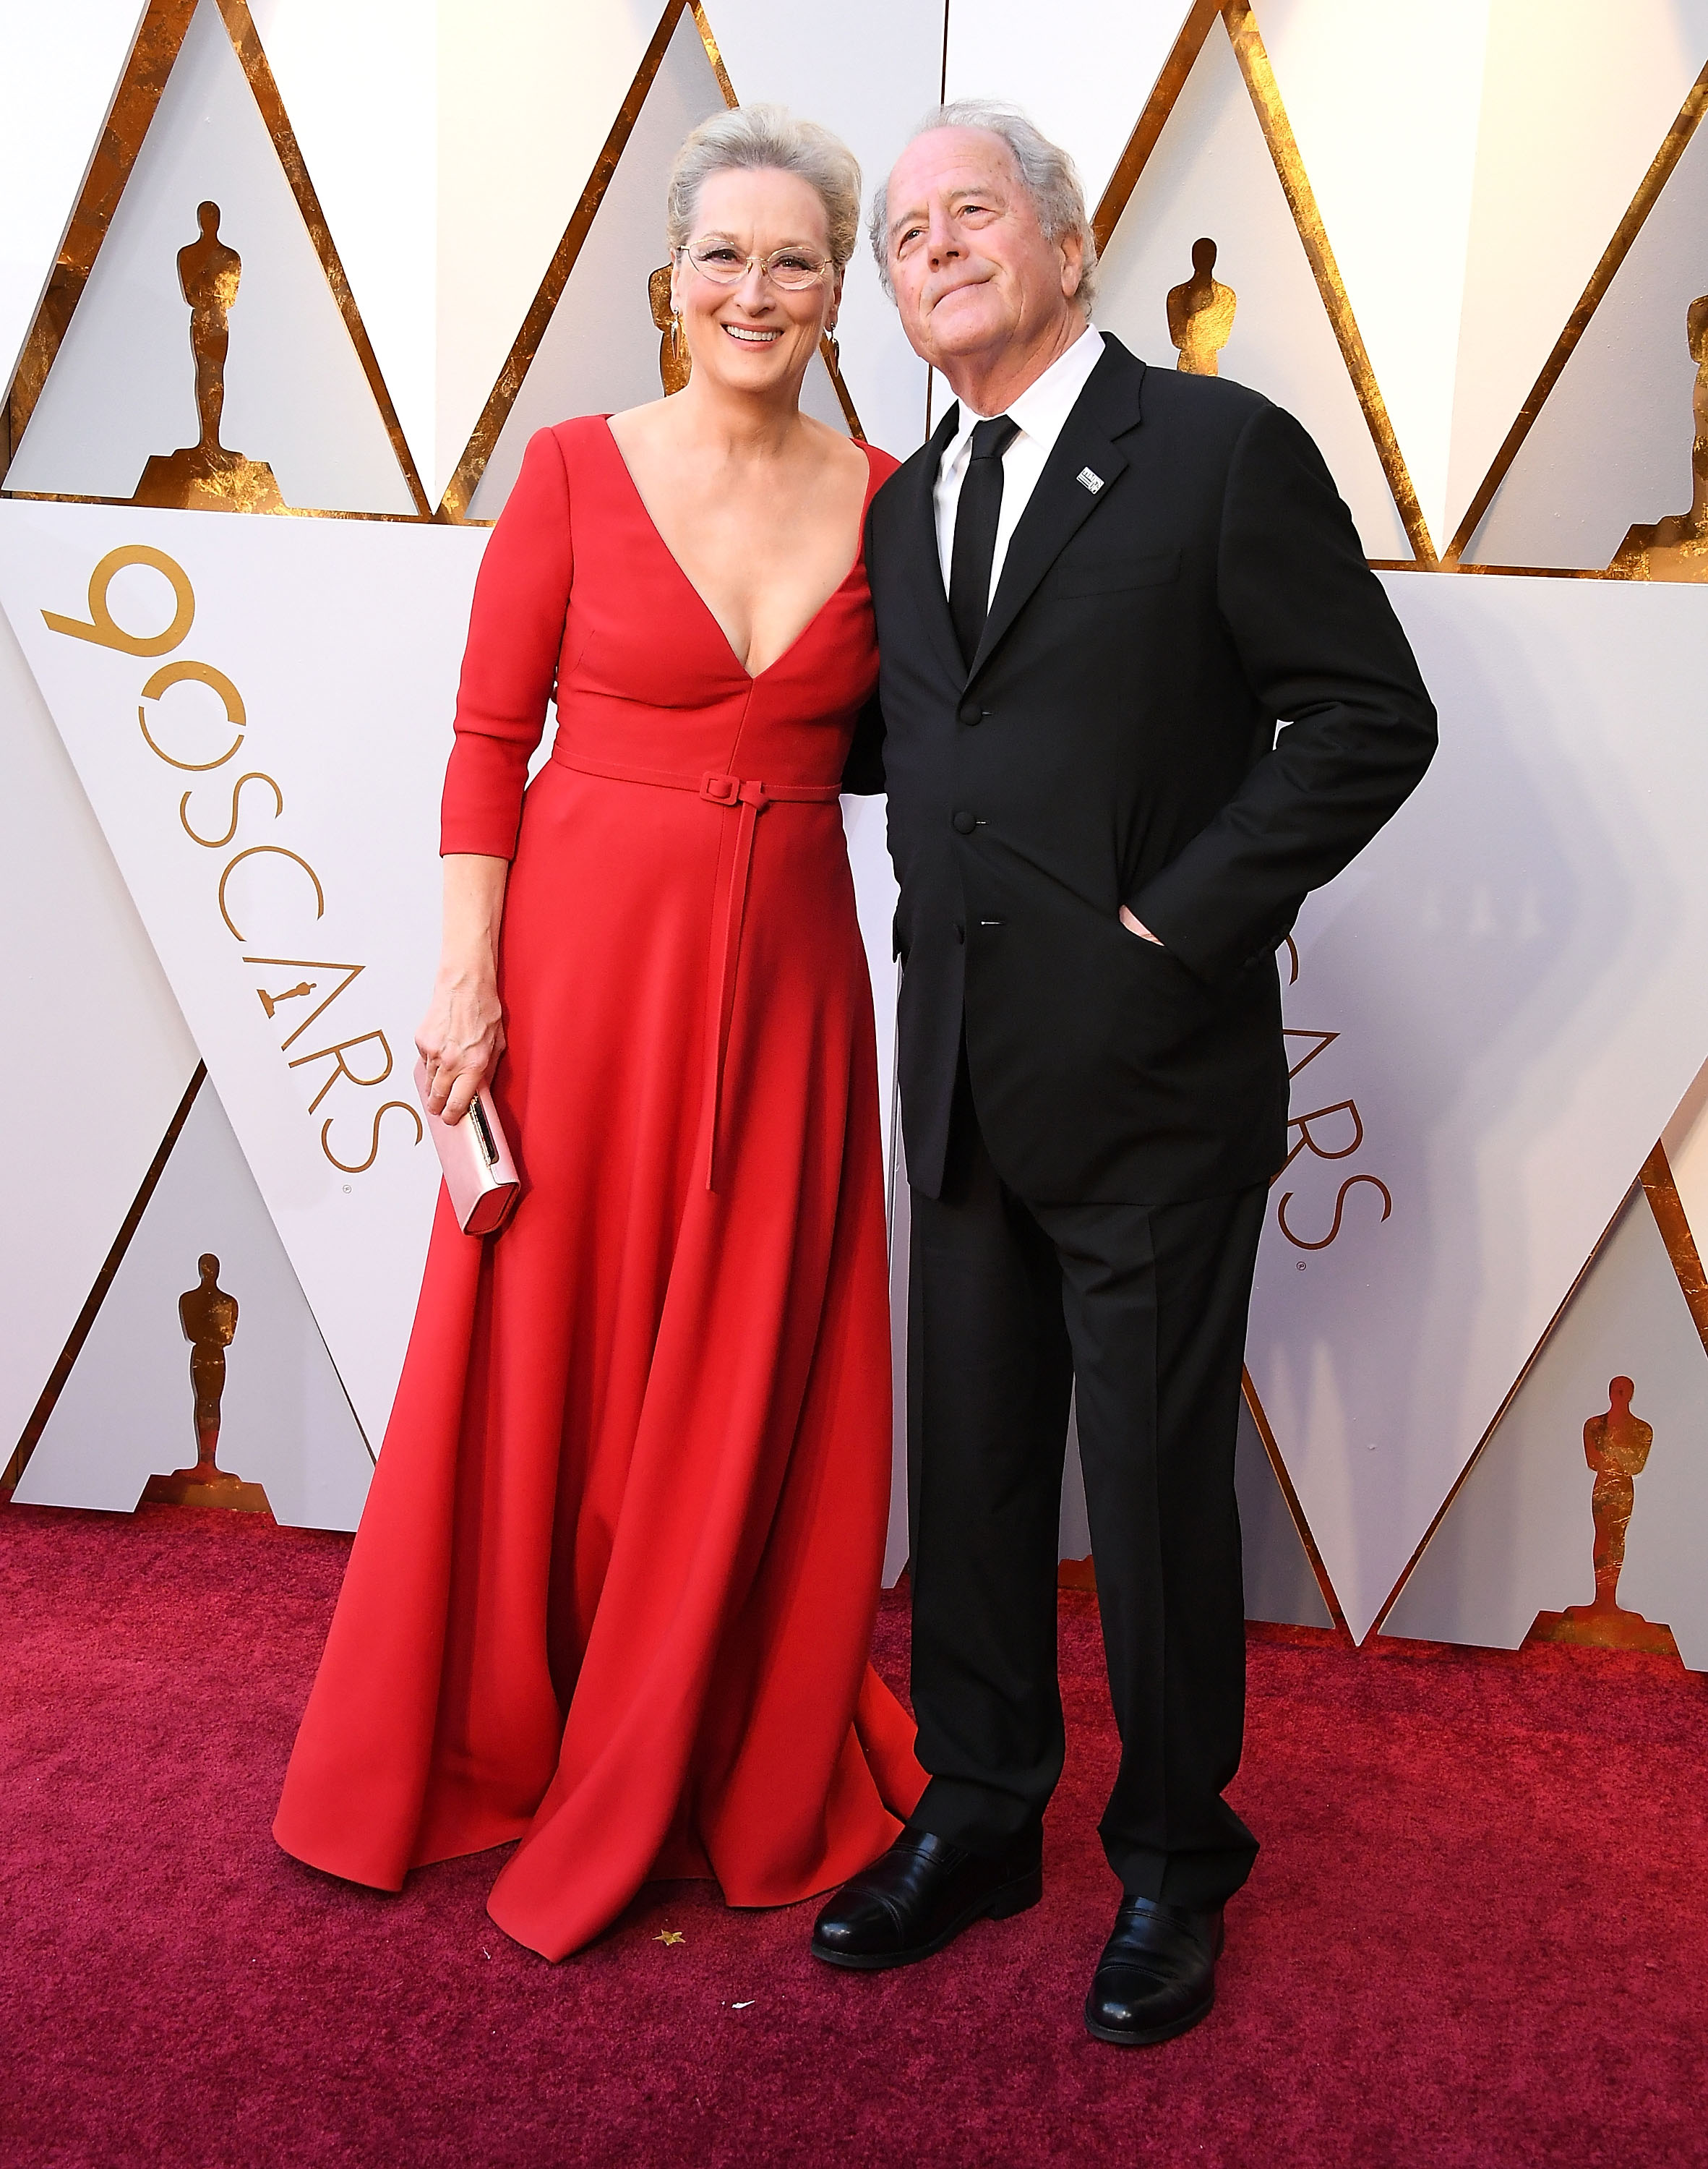 Meryl Streep and Don Gummer at the 90th Annual Academy Awards in Hollywood, California, on March 4, 2018 | Source: Getty Images